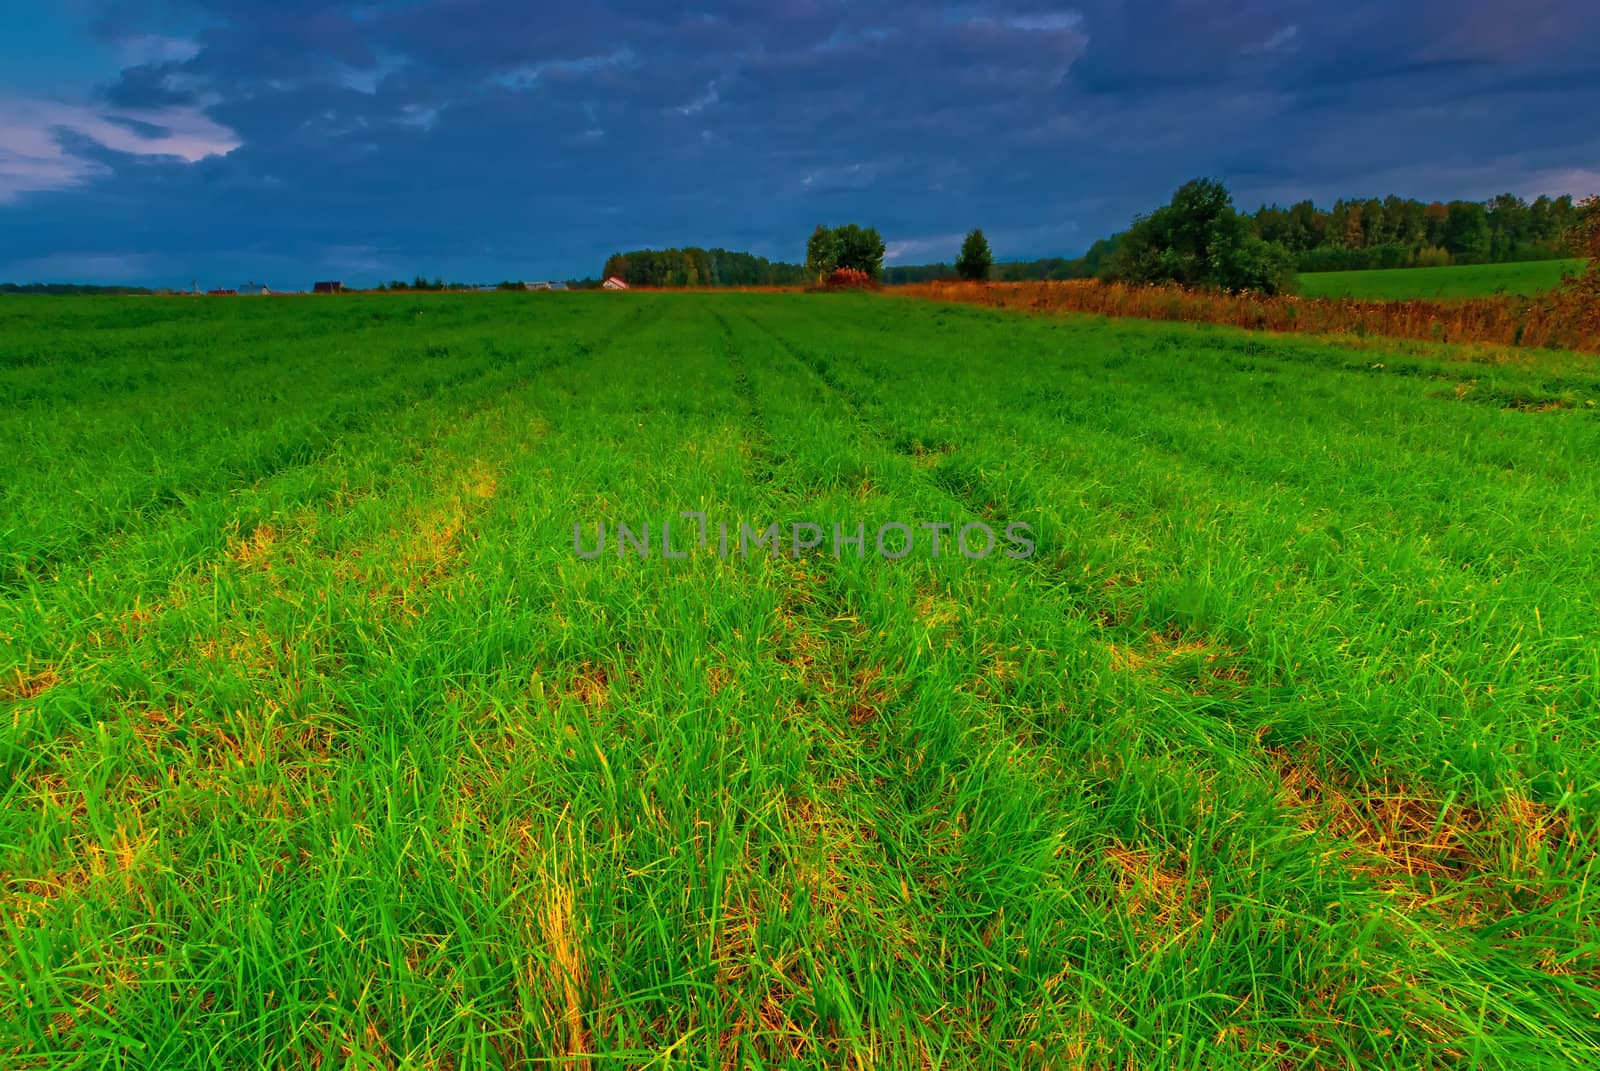 Green grass in a field in the early morning by kosmsos111